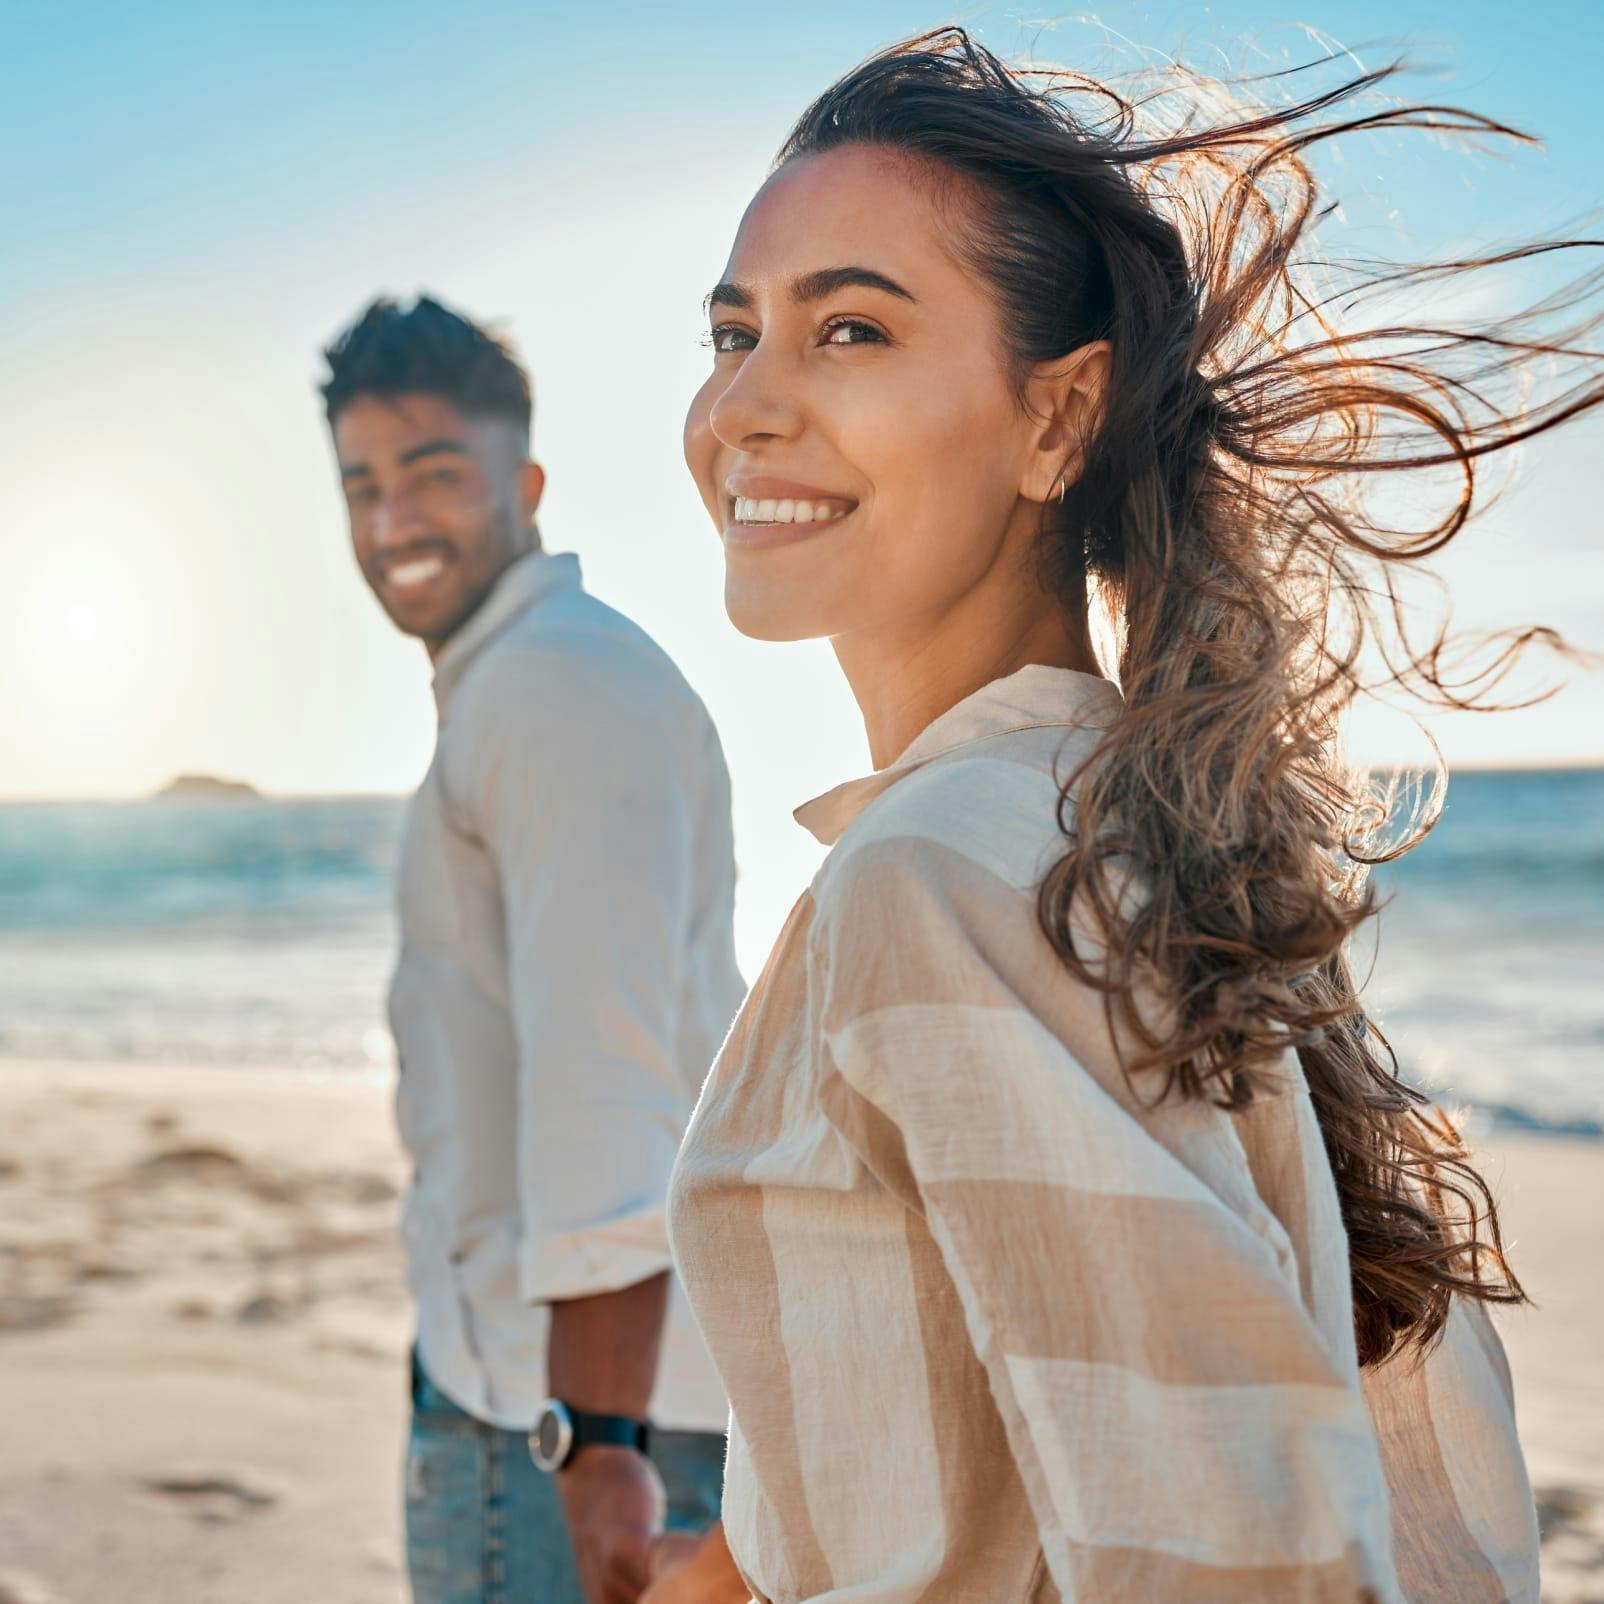 Woman smiling next to a man on the beach